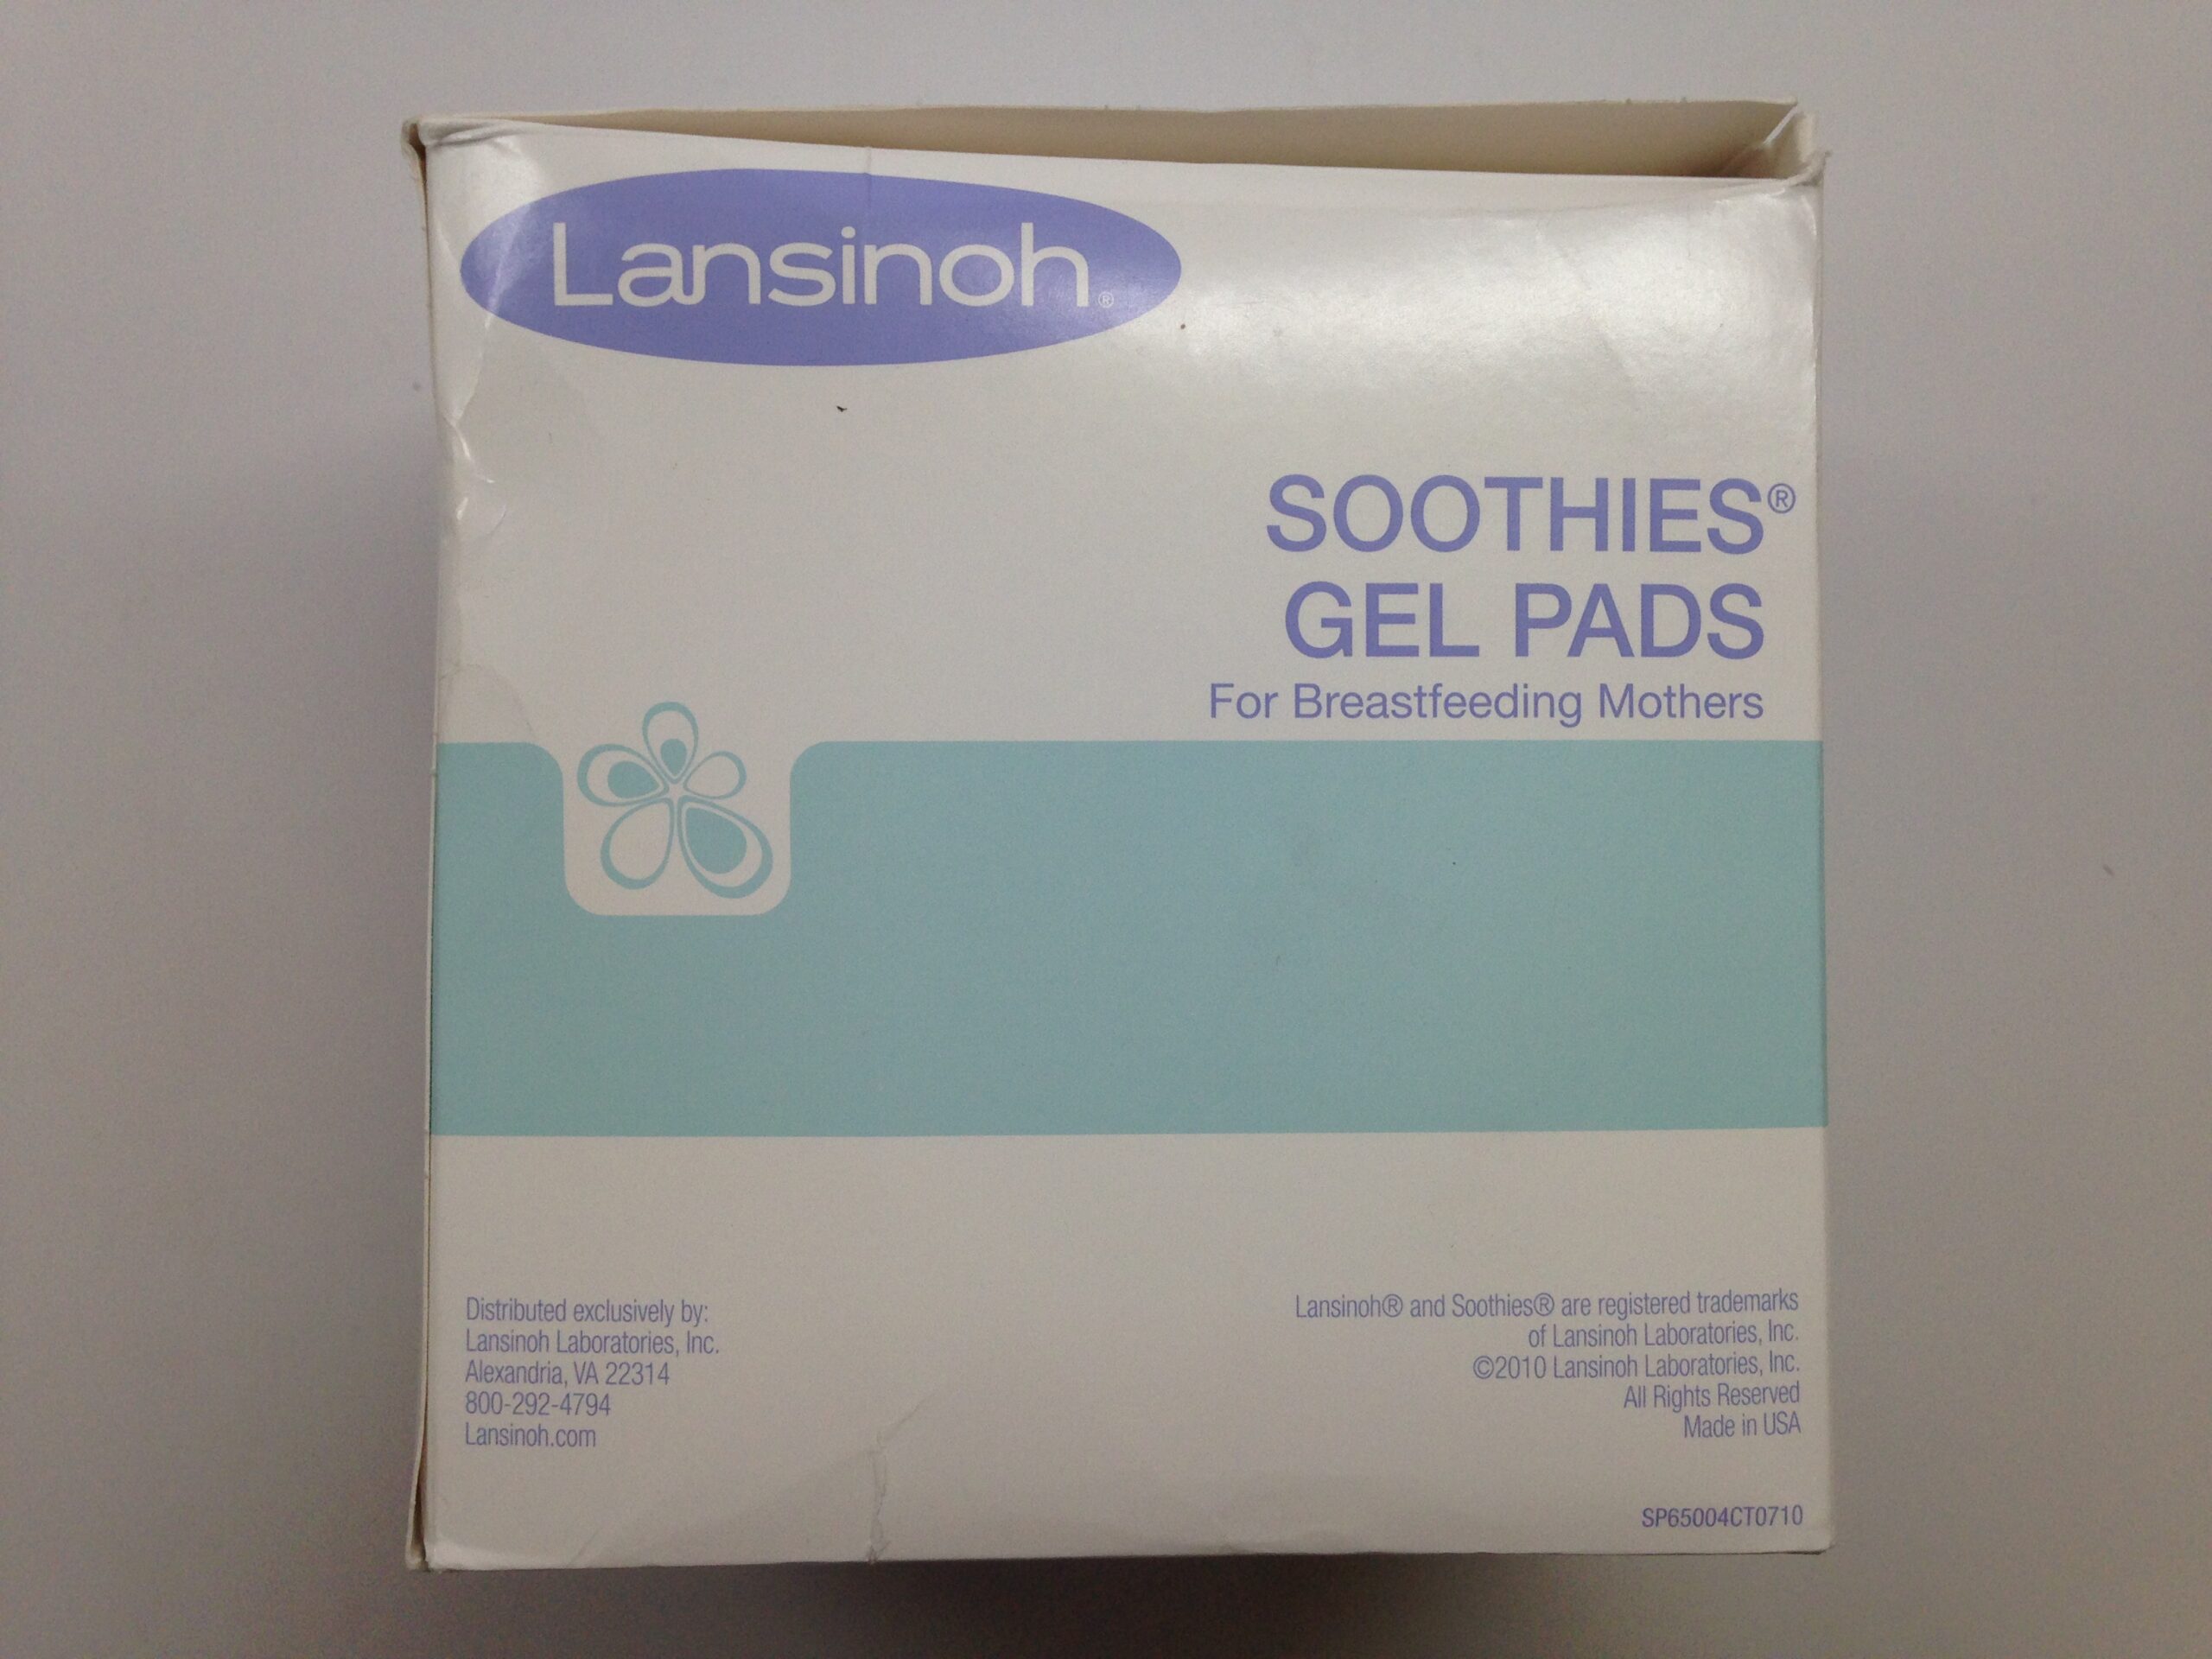 Lansinoh Soothies GEL Pads for Breastfeeding Mothers 2 Count for